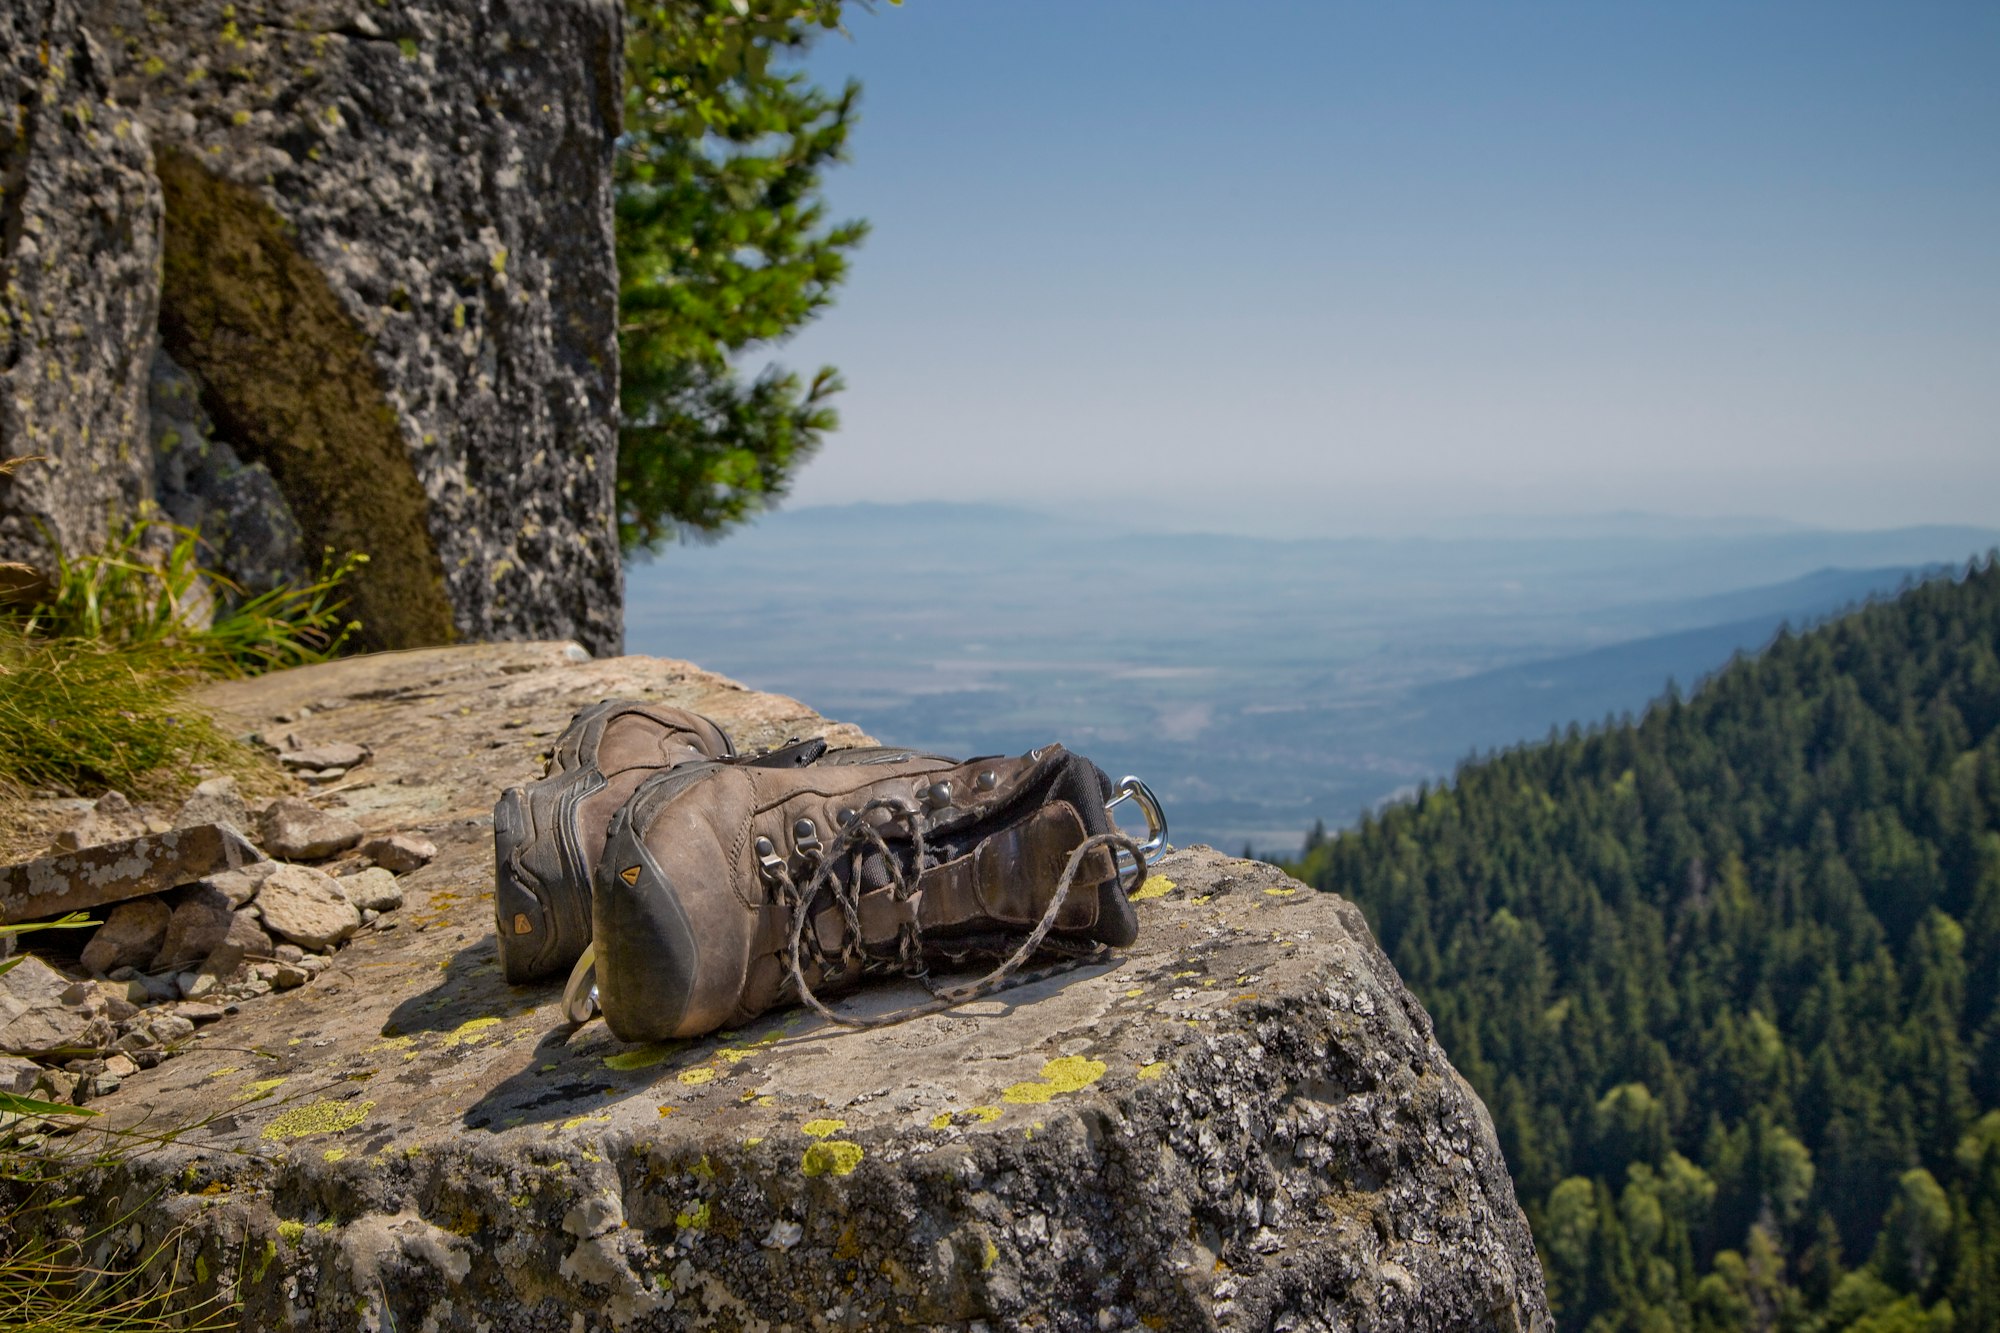 Shot while clipped into the slab at the Kominite climbing area. I’m overlooking Sofia, Bulgaria on the Vitosha mountainrange. My guide’s boots were perched just above the anchor and made for this shot. One of the best climbing days of my life.